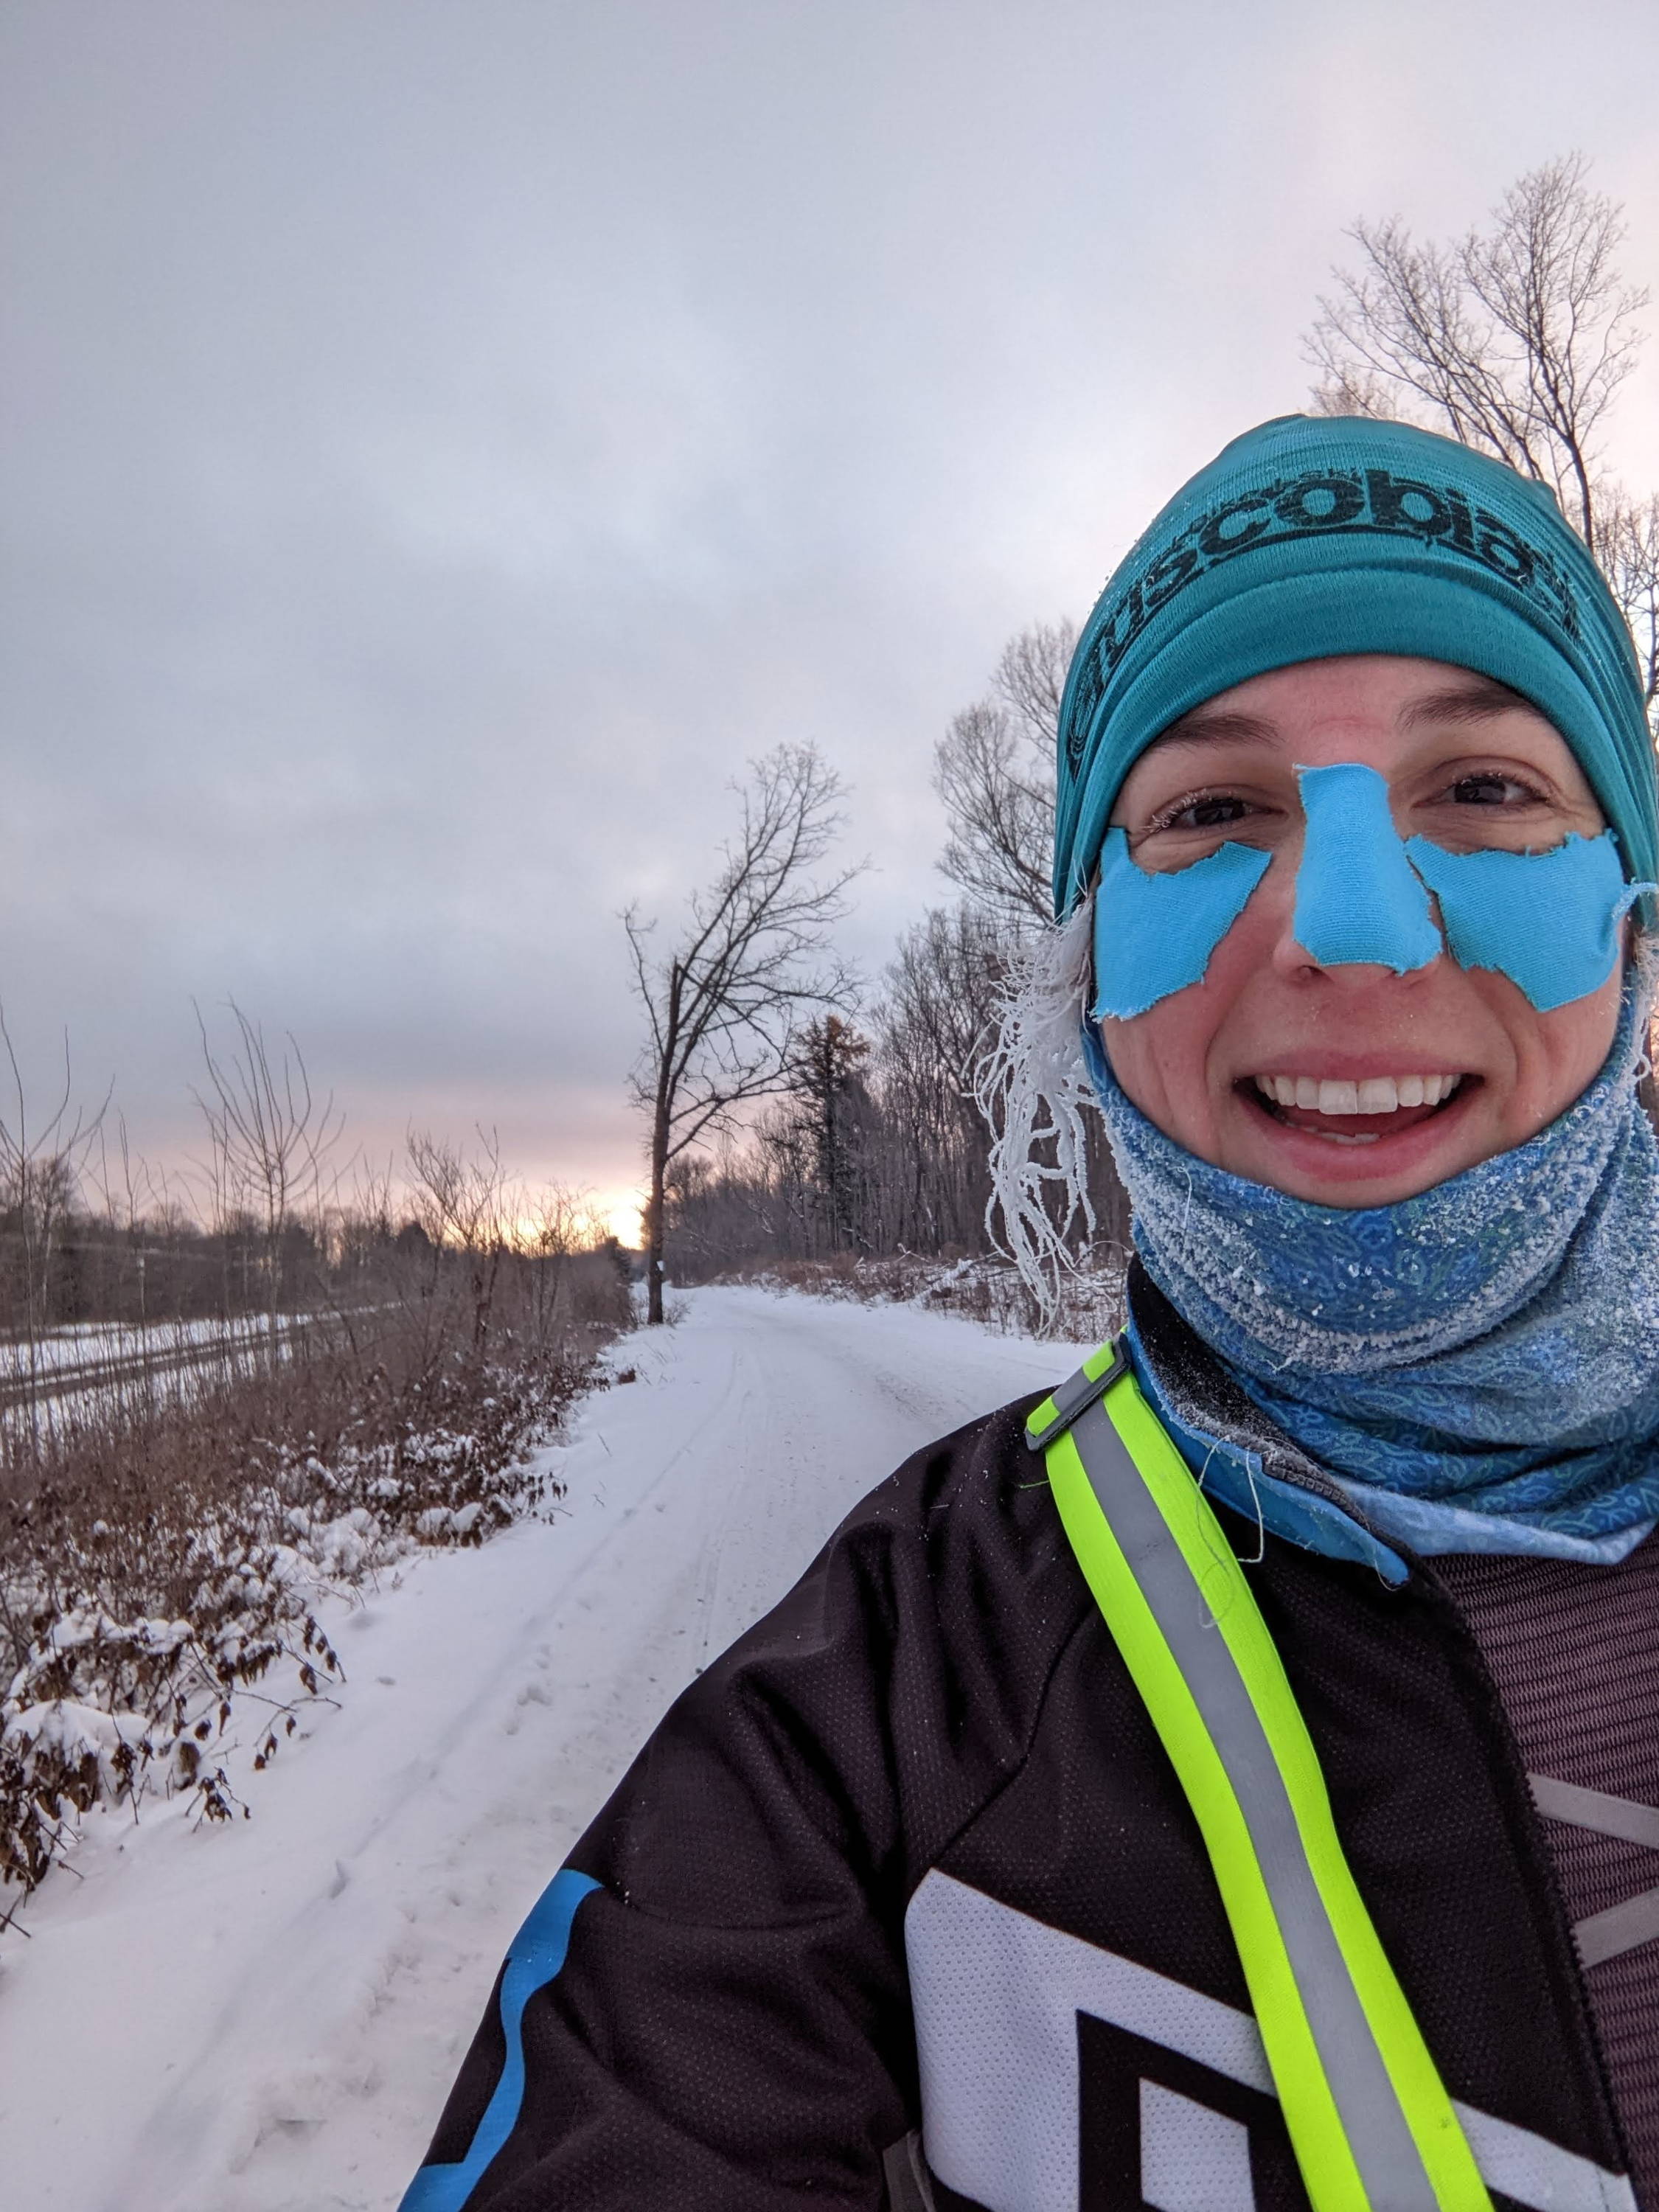 A woman in outdoor gear with frozen hair and face protection smiles in front of a calm sunrise.